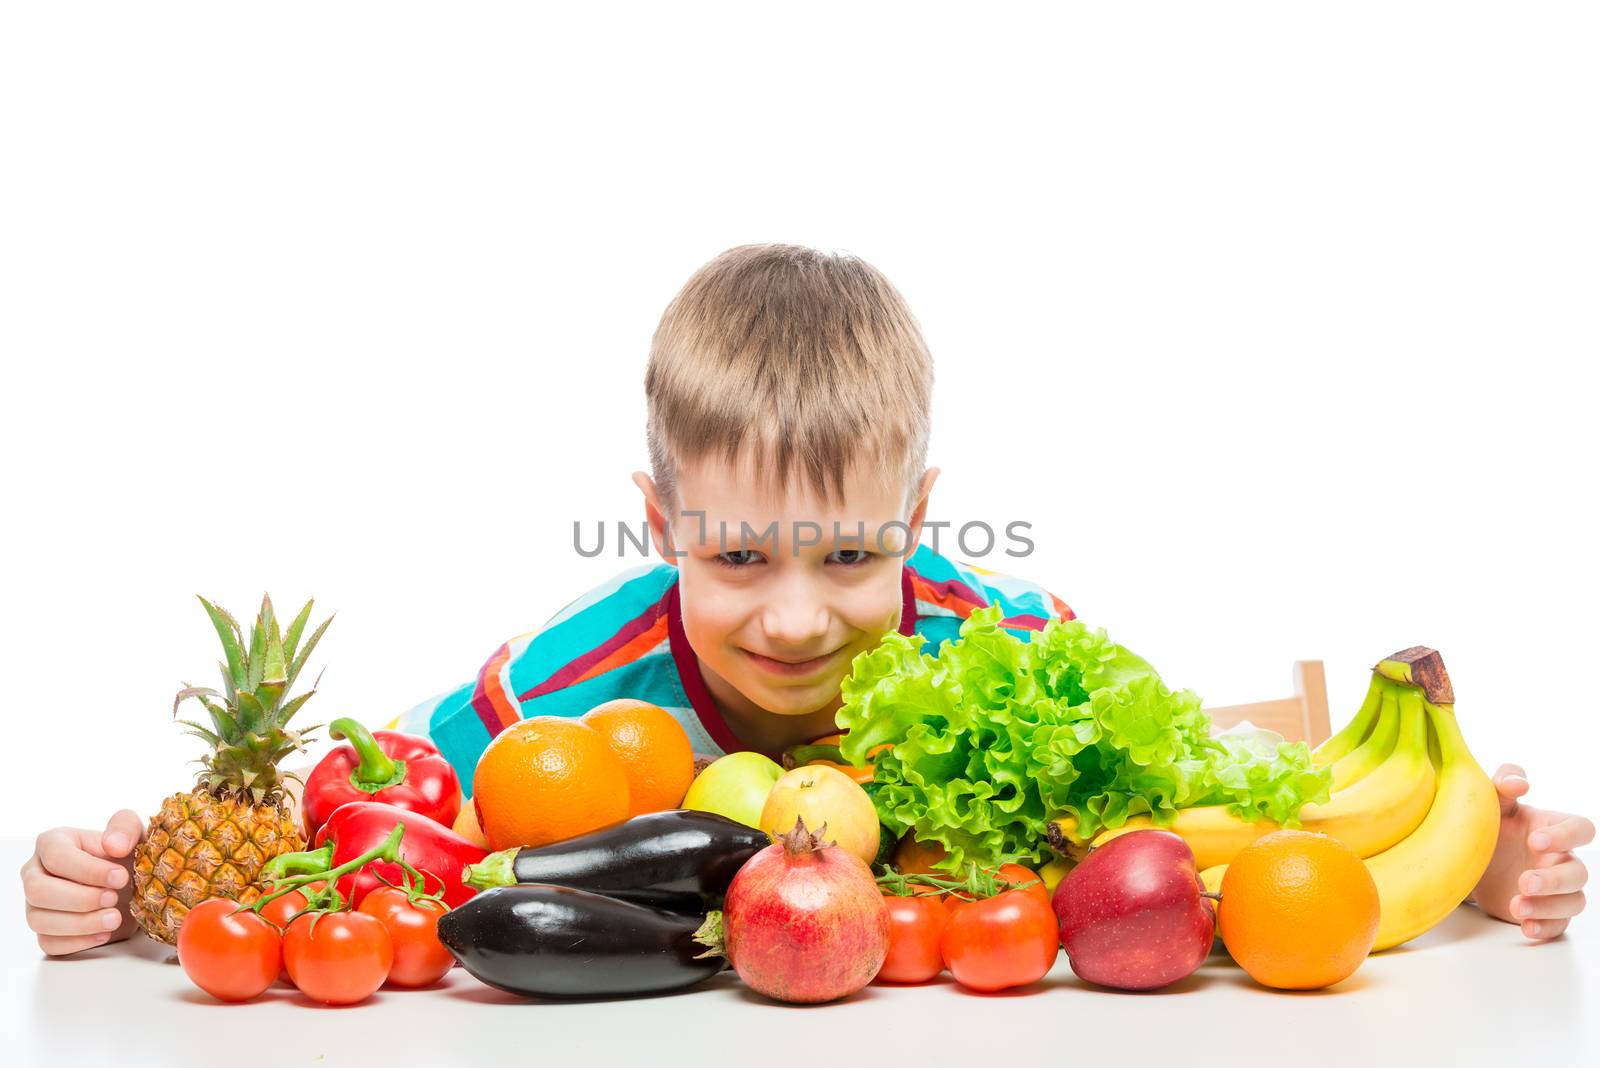 Smiling healthy boy with a bunch of juicy ripe vegetables and fr by kosmsos111